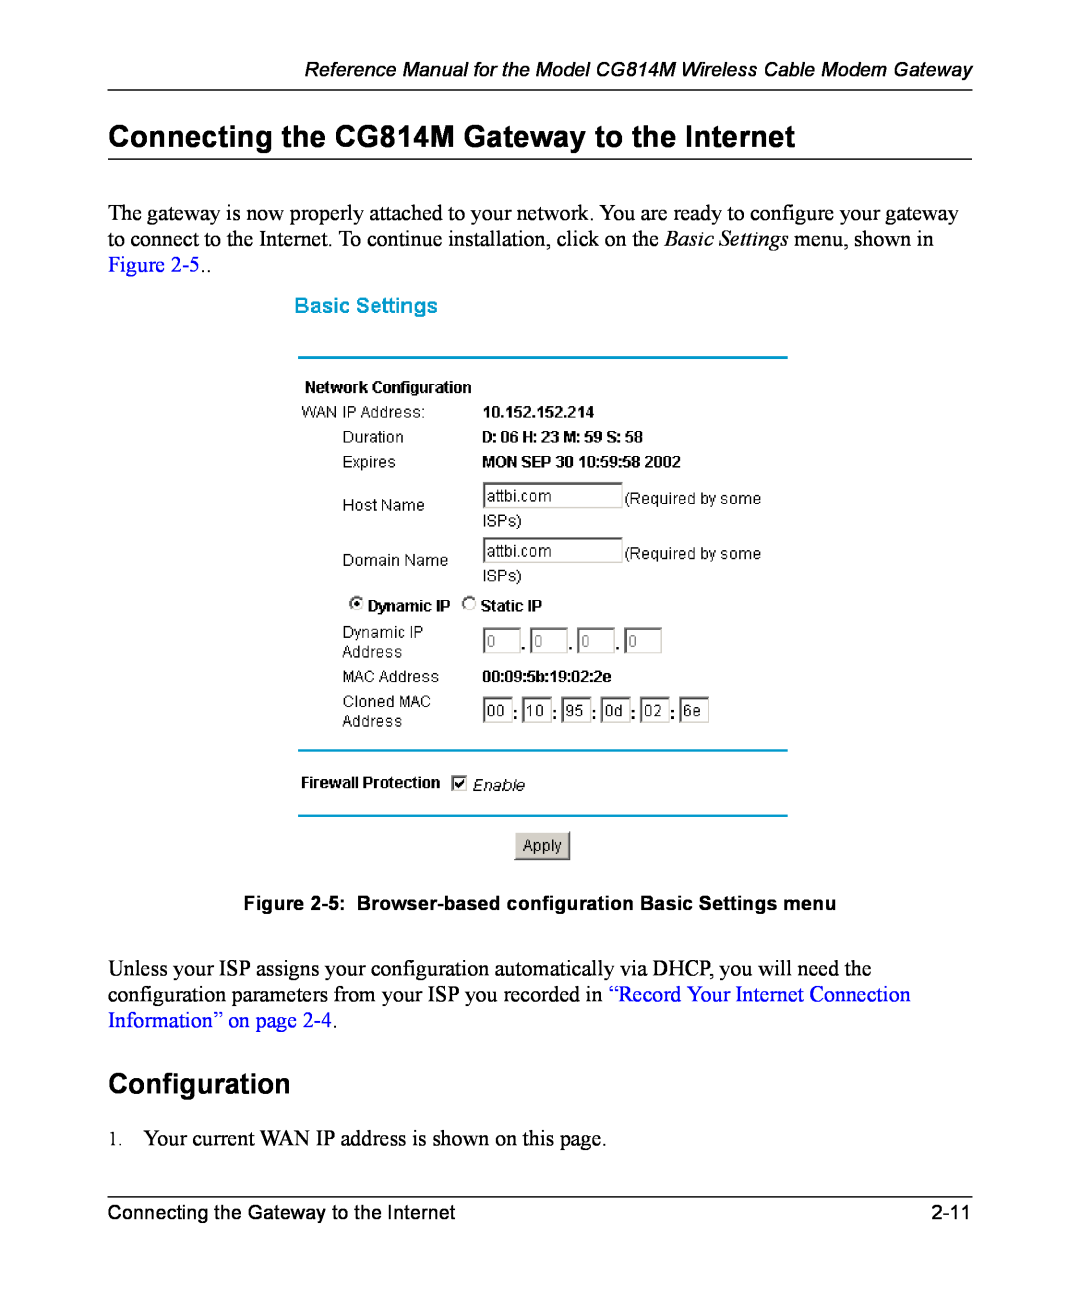 NETGEAR manual Connecting the CG814M Gateway to the Internet, Configuration 